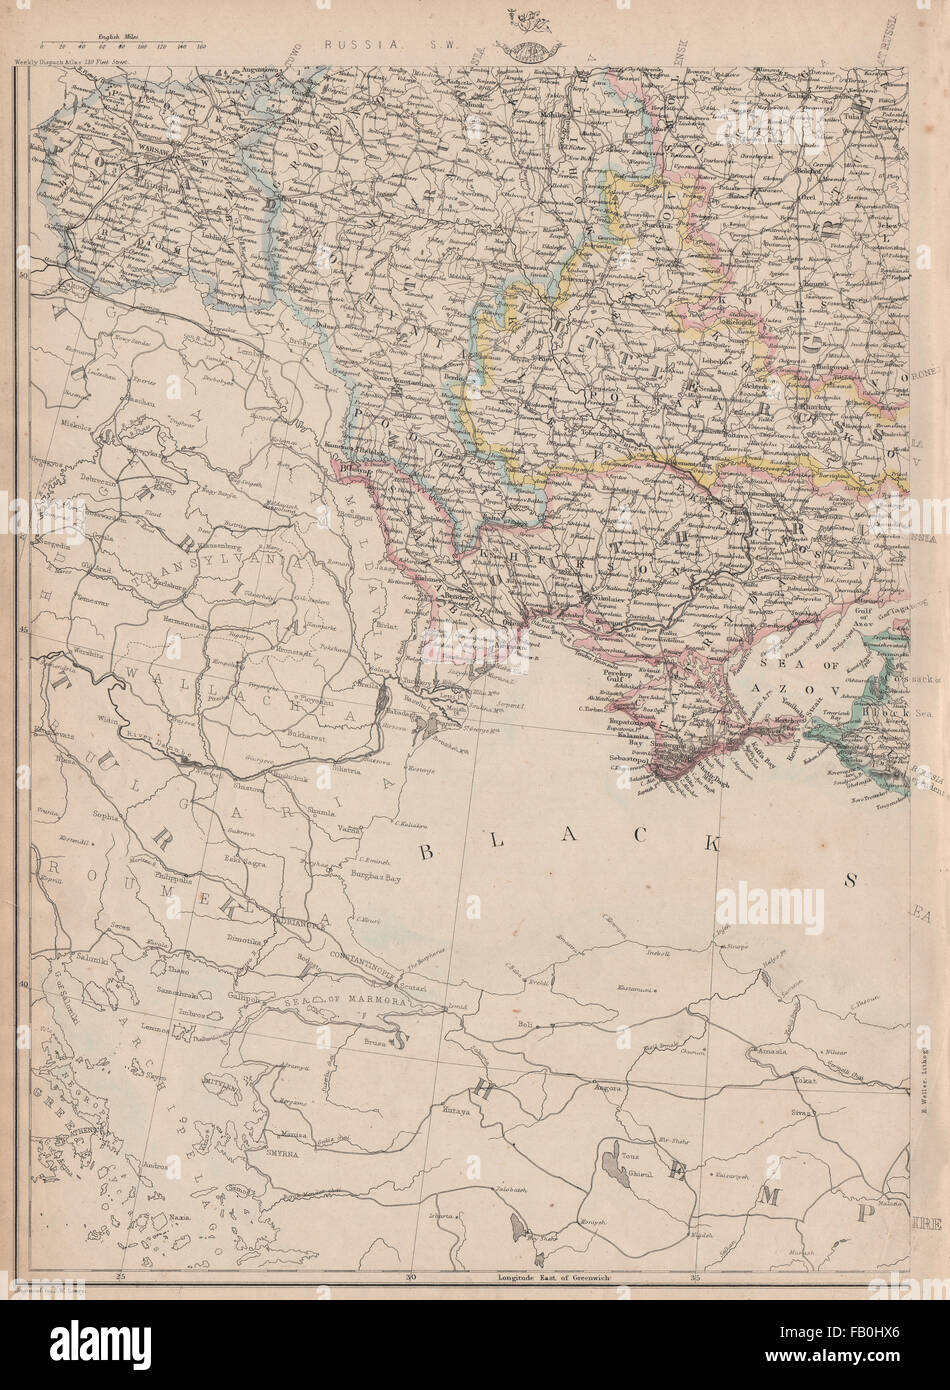 RUSSIA IN EUROPE SW. Ukraine & Poland. JW LOWRY for the Dispatch atlas, 1862 map Stock Photo